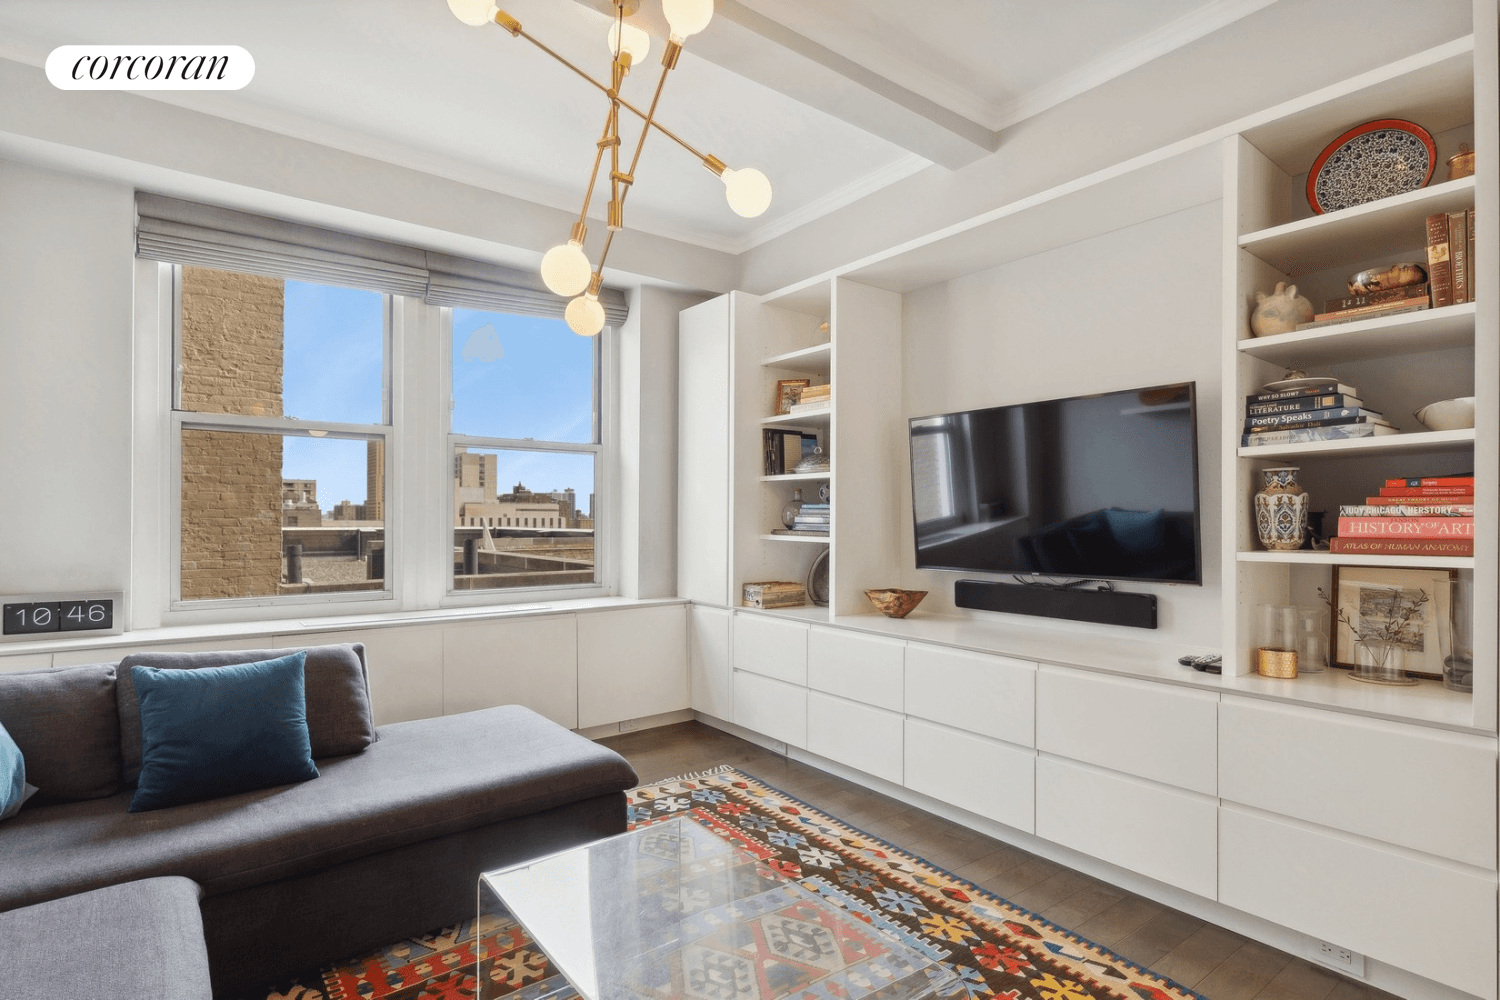 1215 Fifth Avenue, Apt. 11D located across from Central Park, on Fifth Avenue and 102nd Street is a triple mint, gut renovated one bedroom, one bath that retains the apartment's ...